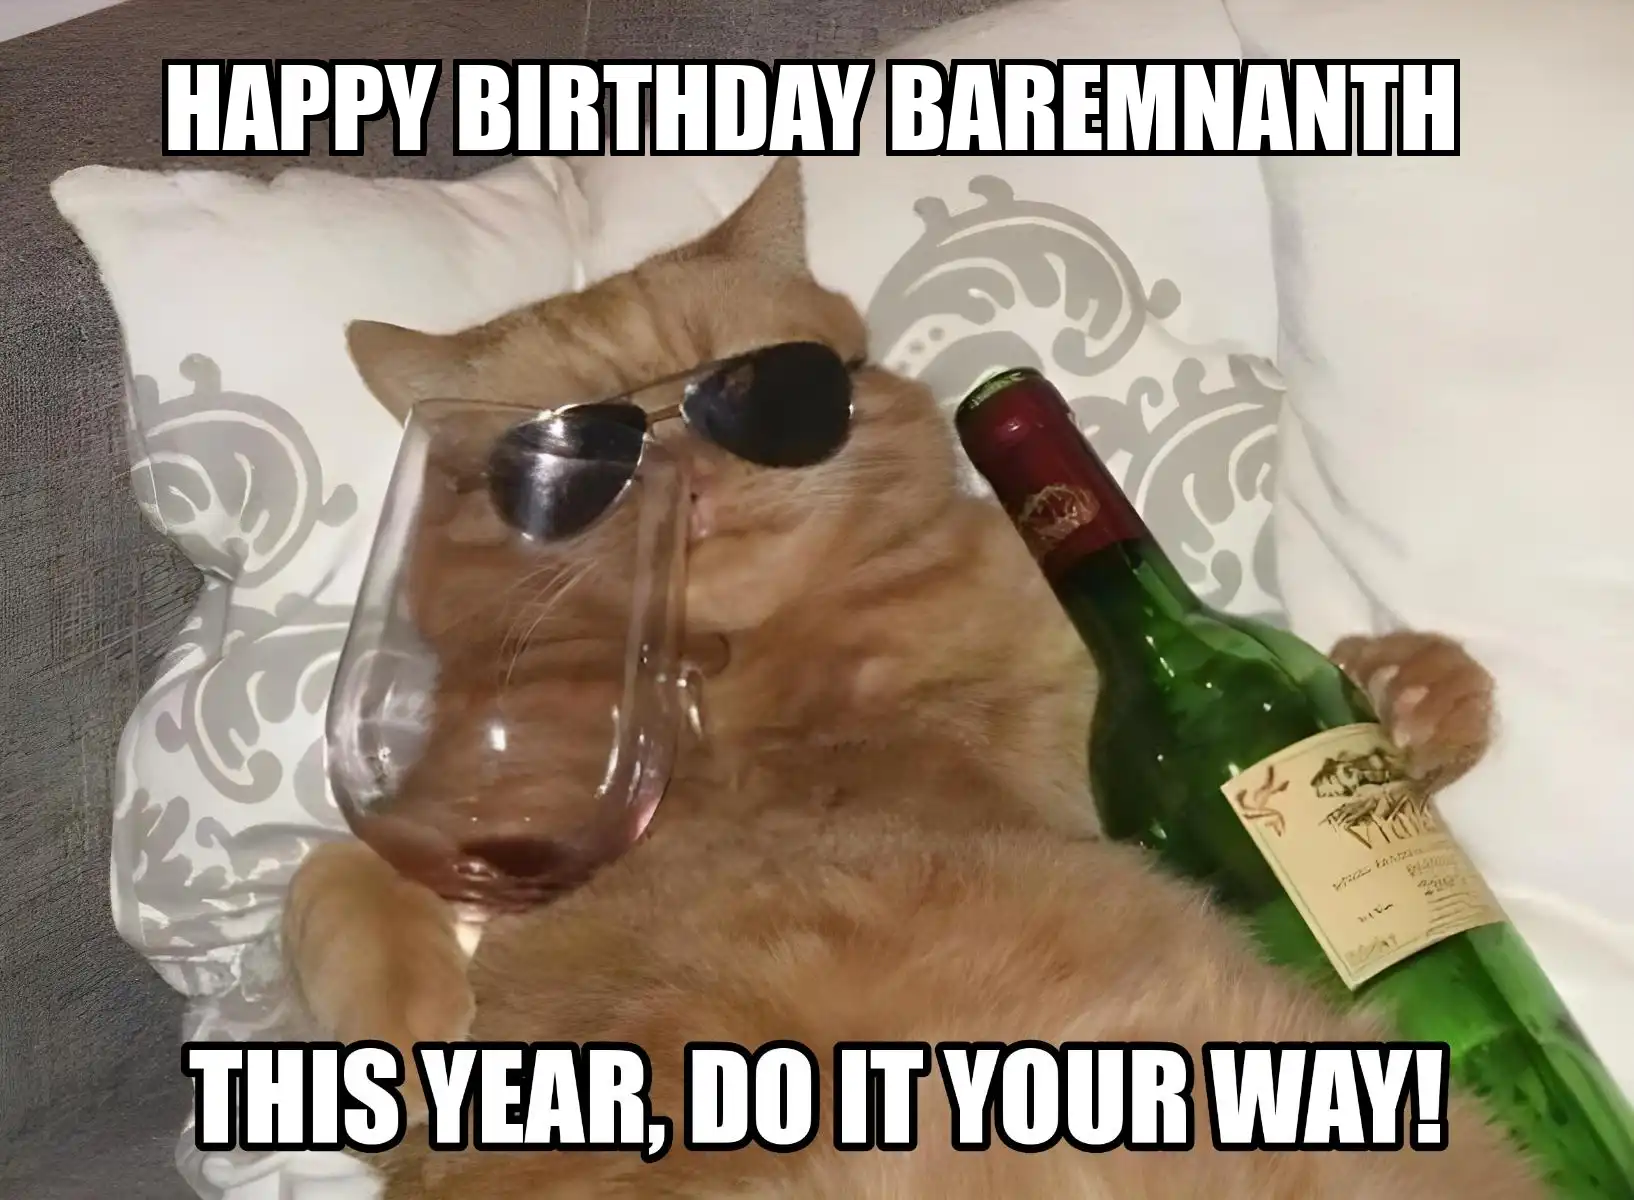 Happy Birthday Baremnanth This Year Do It Your Way Meme